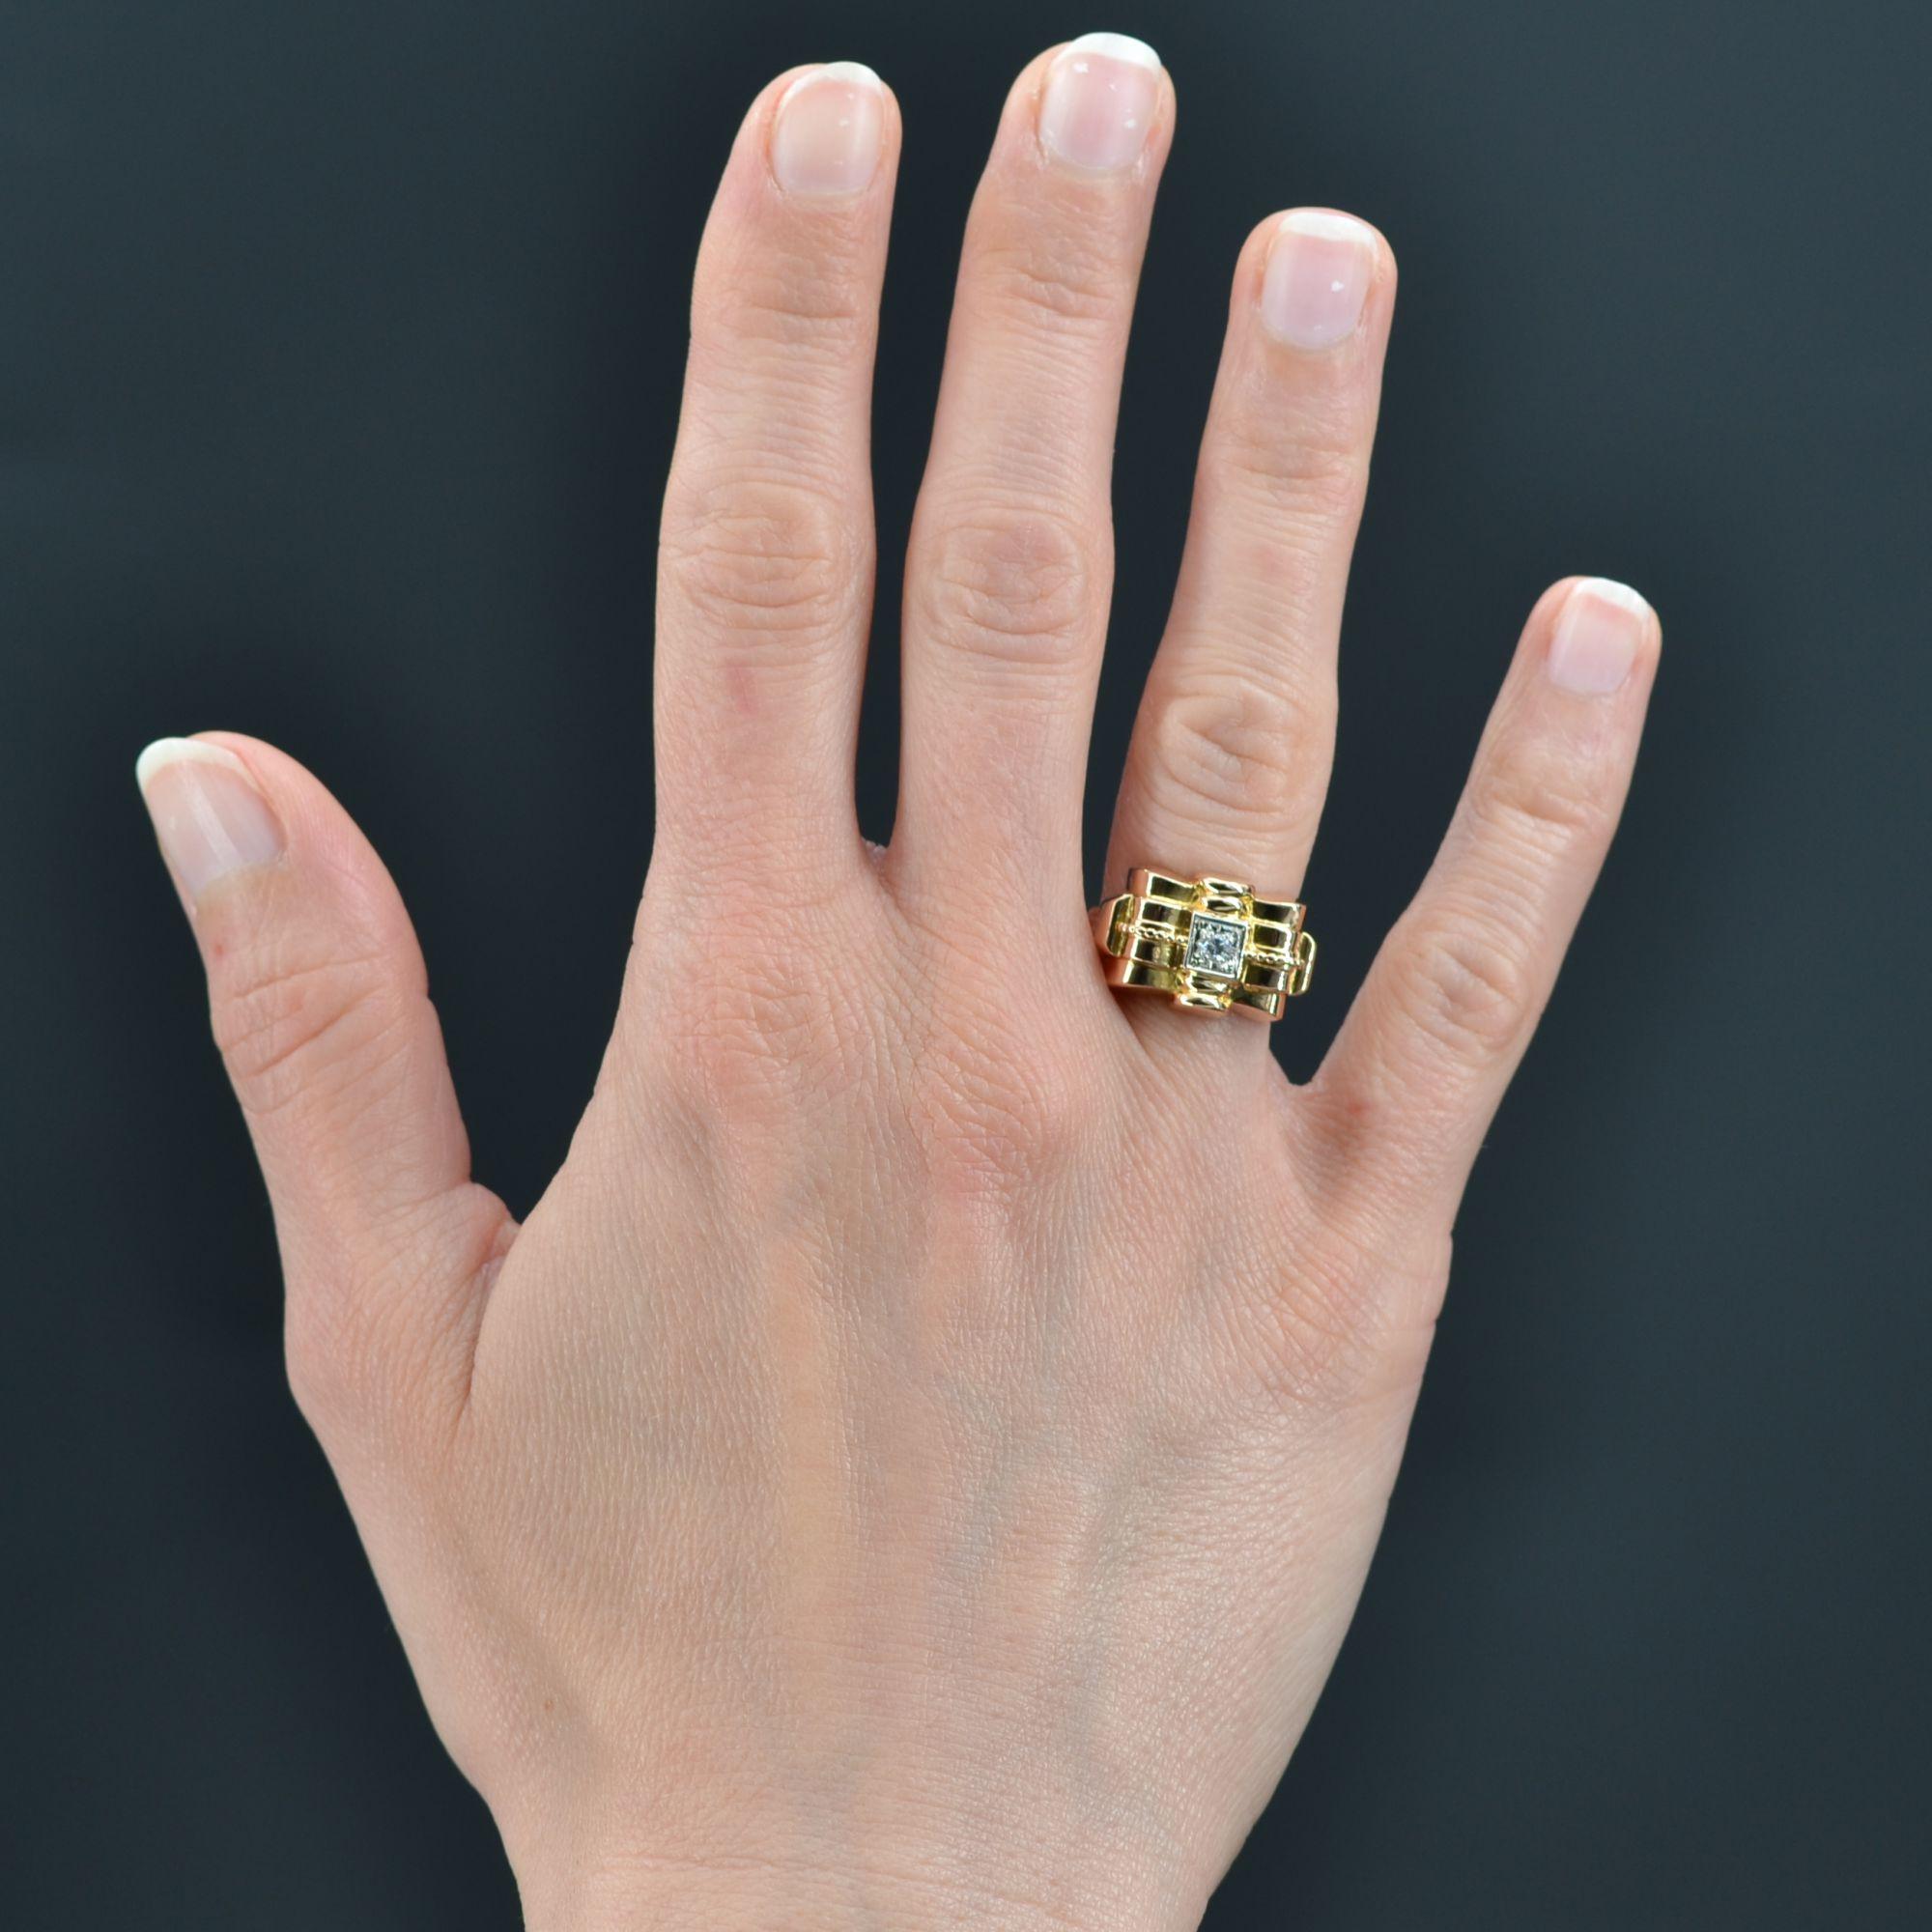 Ring in 18 karat yellow gold, eagle head hallmark.
Tank ring called bridge ring, it is decorated on its top within a geometric decoration of a modern brilliant- cut diamond. On both sides a gold cord adorns the plate.
Total weight of the diamond :